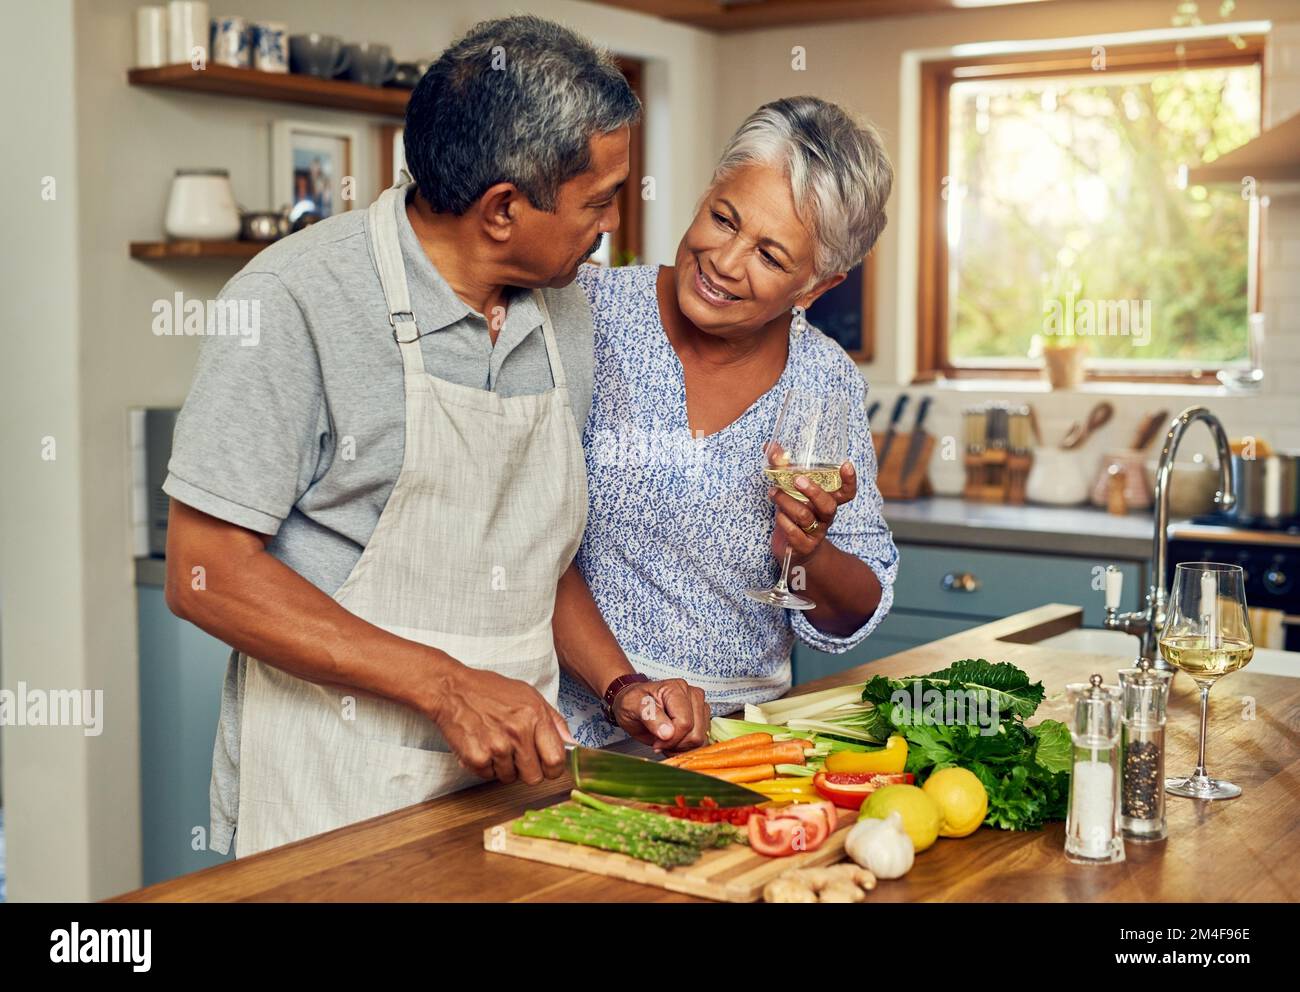 Nothing says love like a home cooked meal. a happy mature couple cooking a meal together at home. Stock Photo